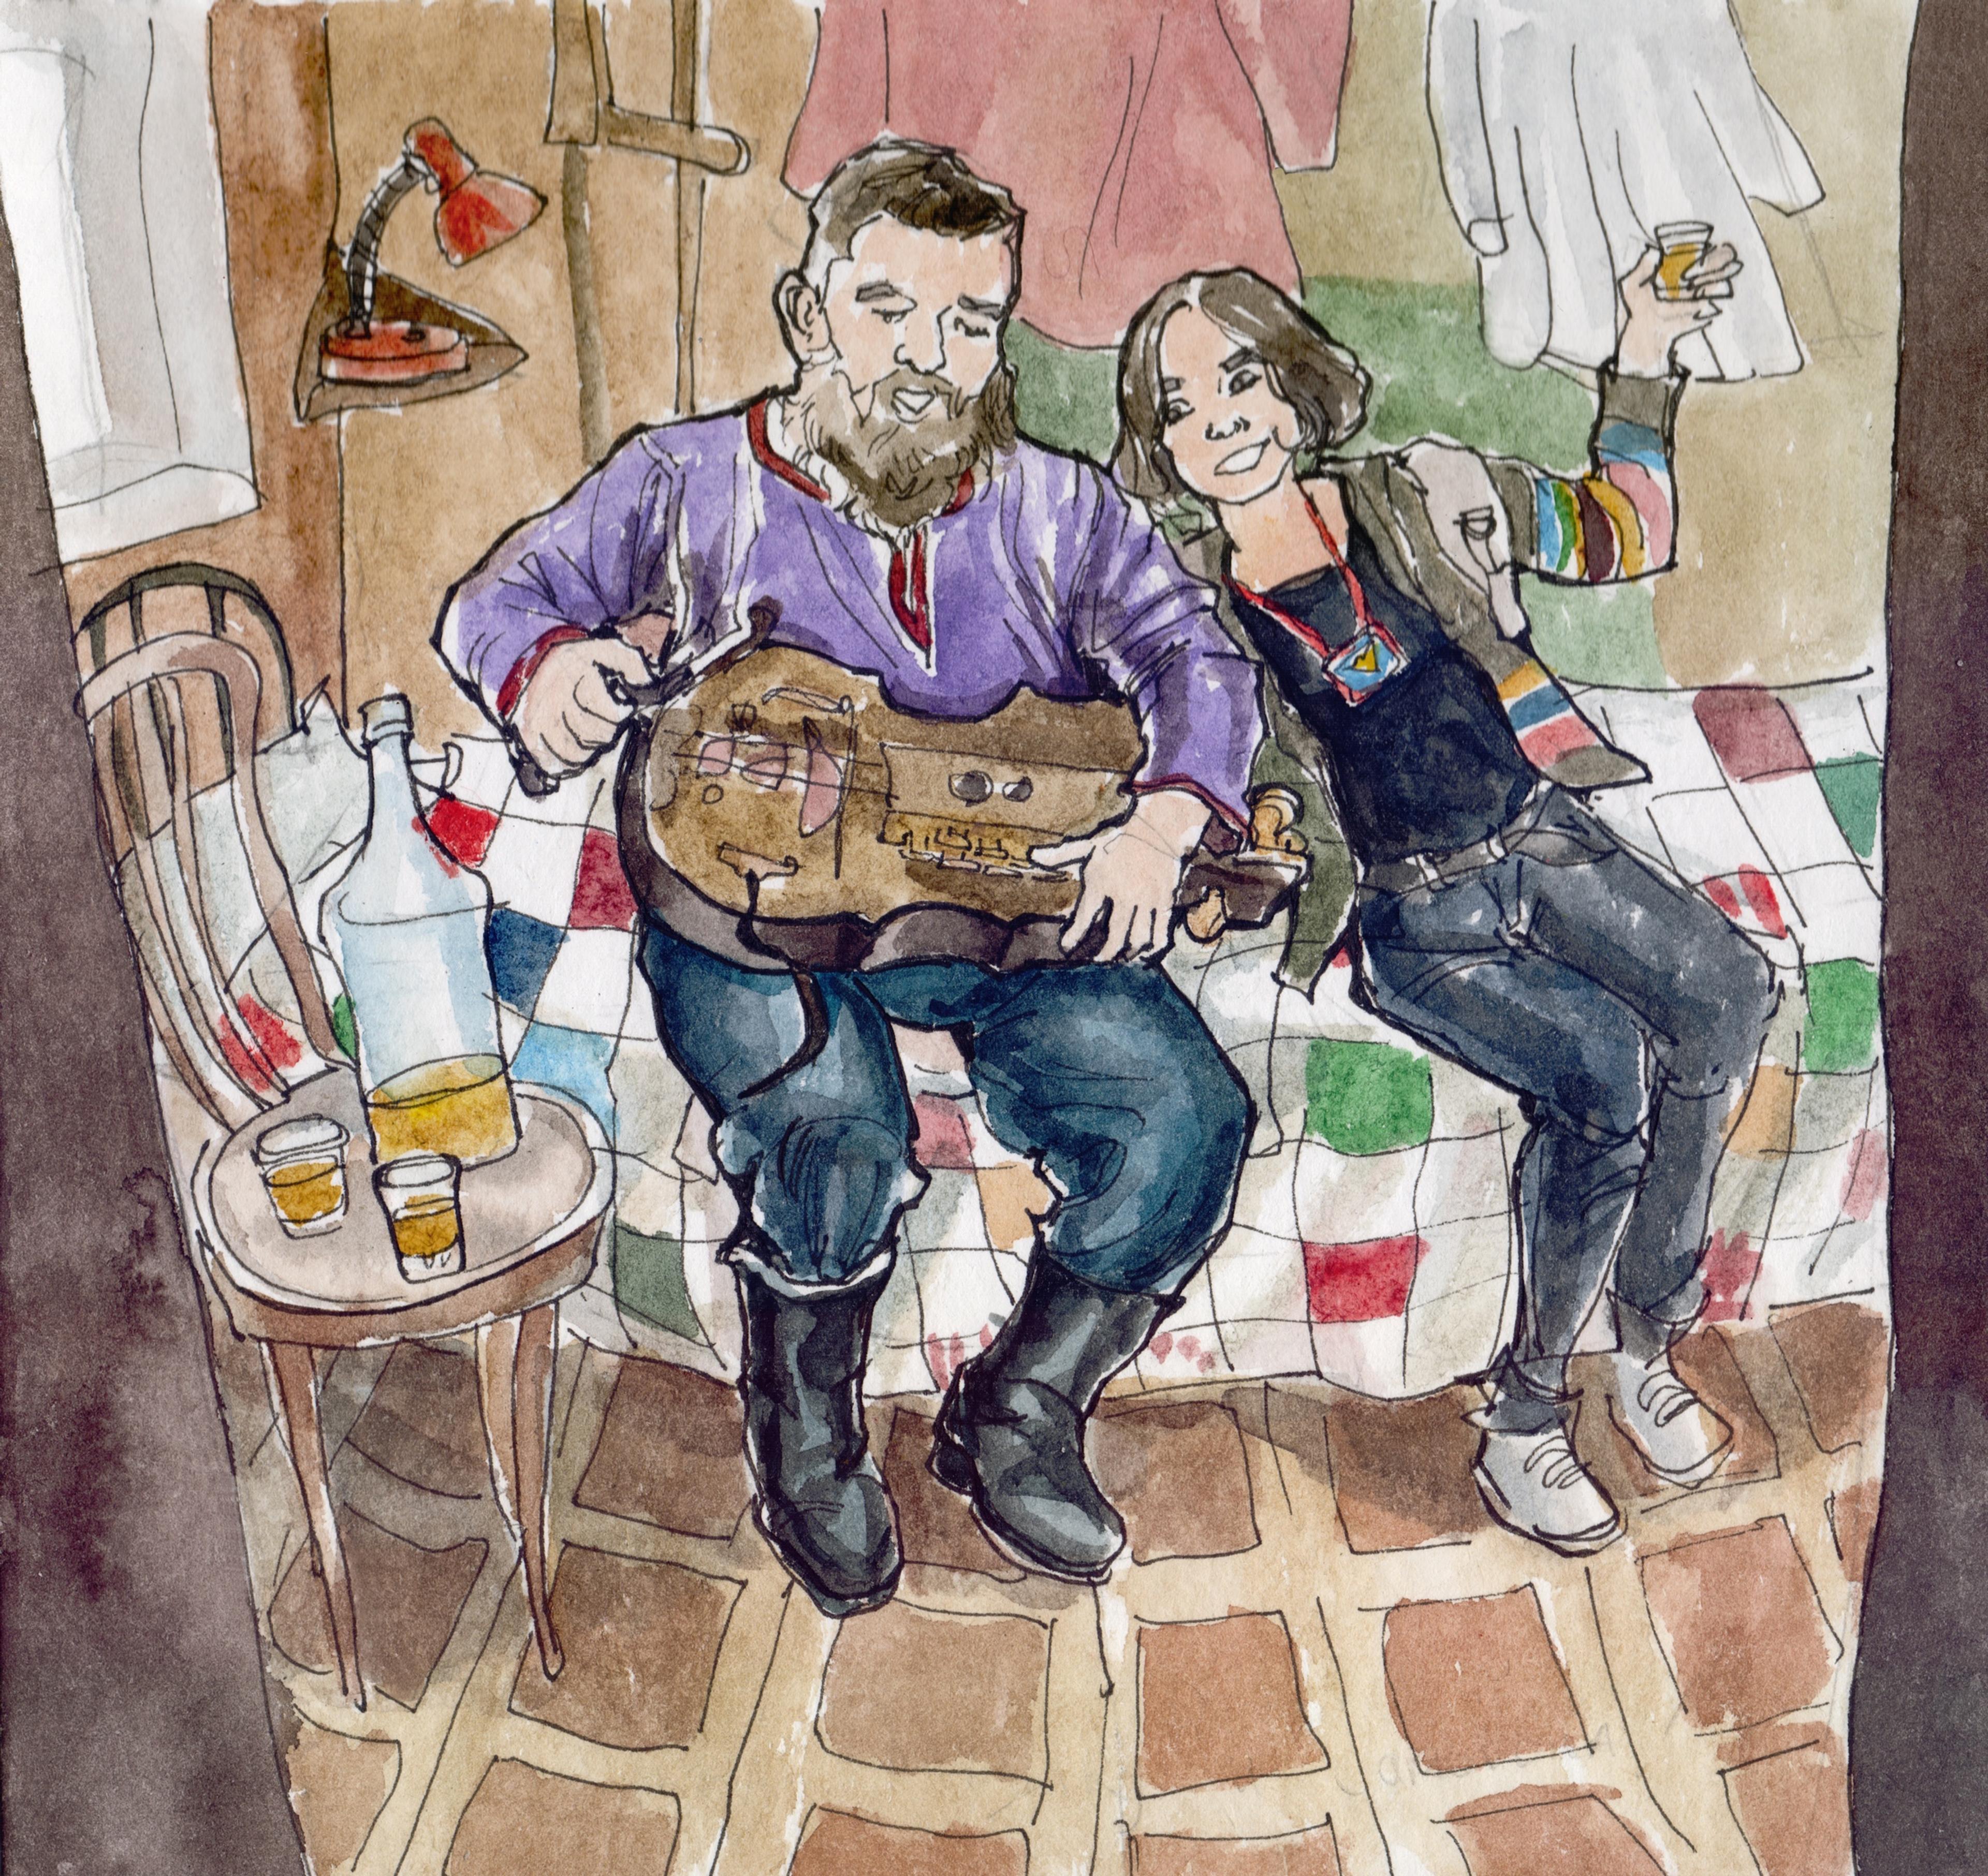 Watercolour painting of a girl and a man playing an instrument singing and drinking